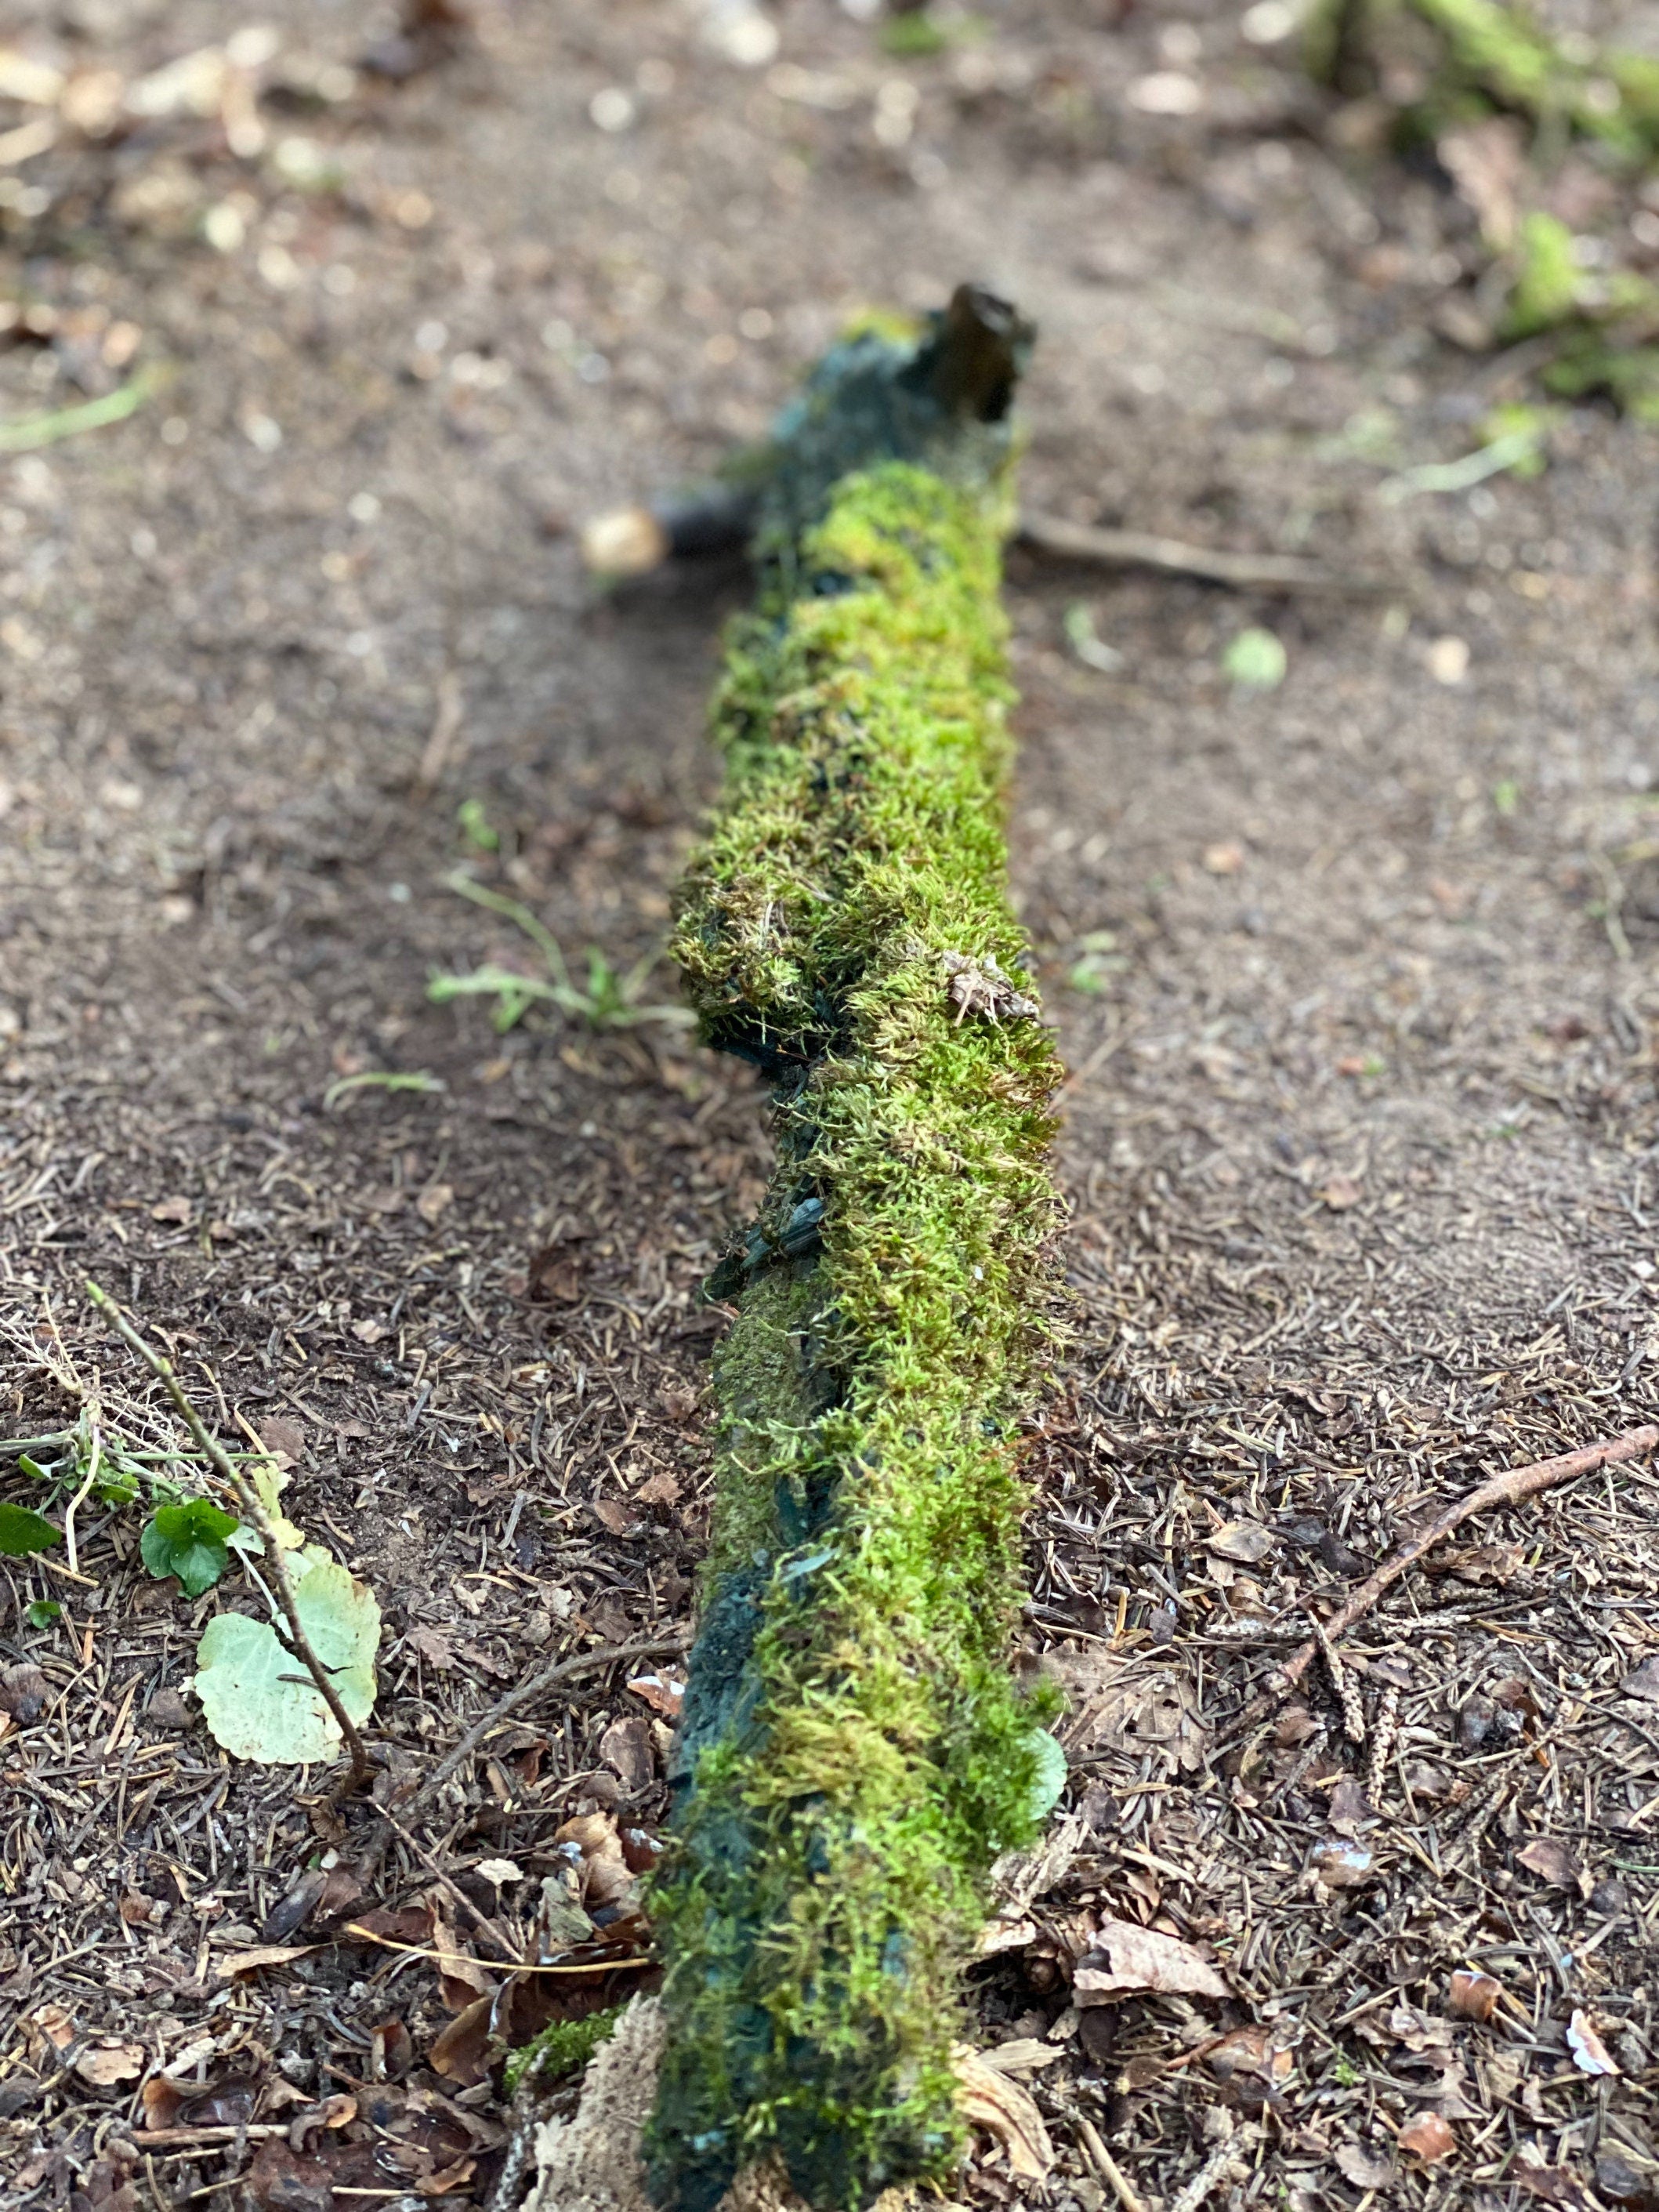 Live Moss on a Blue Colored Log, Mossy Log Approximately 31 Inches Long x 5 Inches Wide x About 3 Inches High